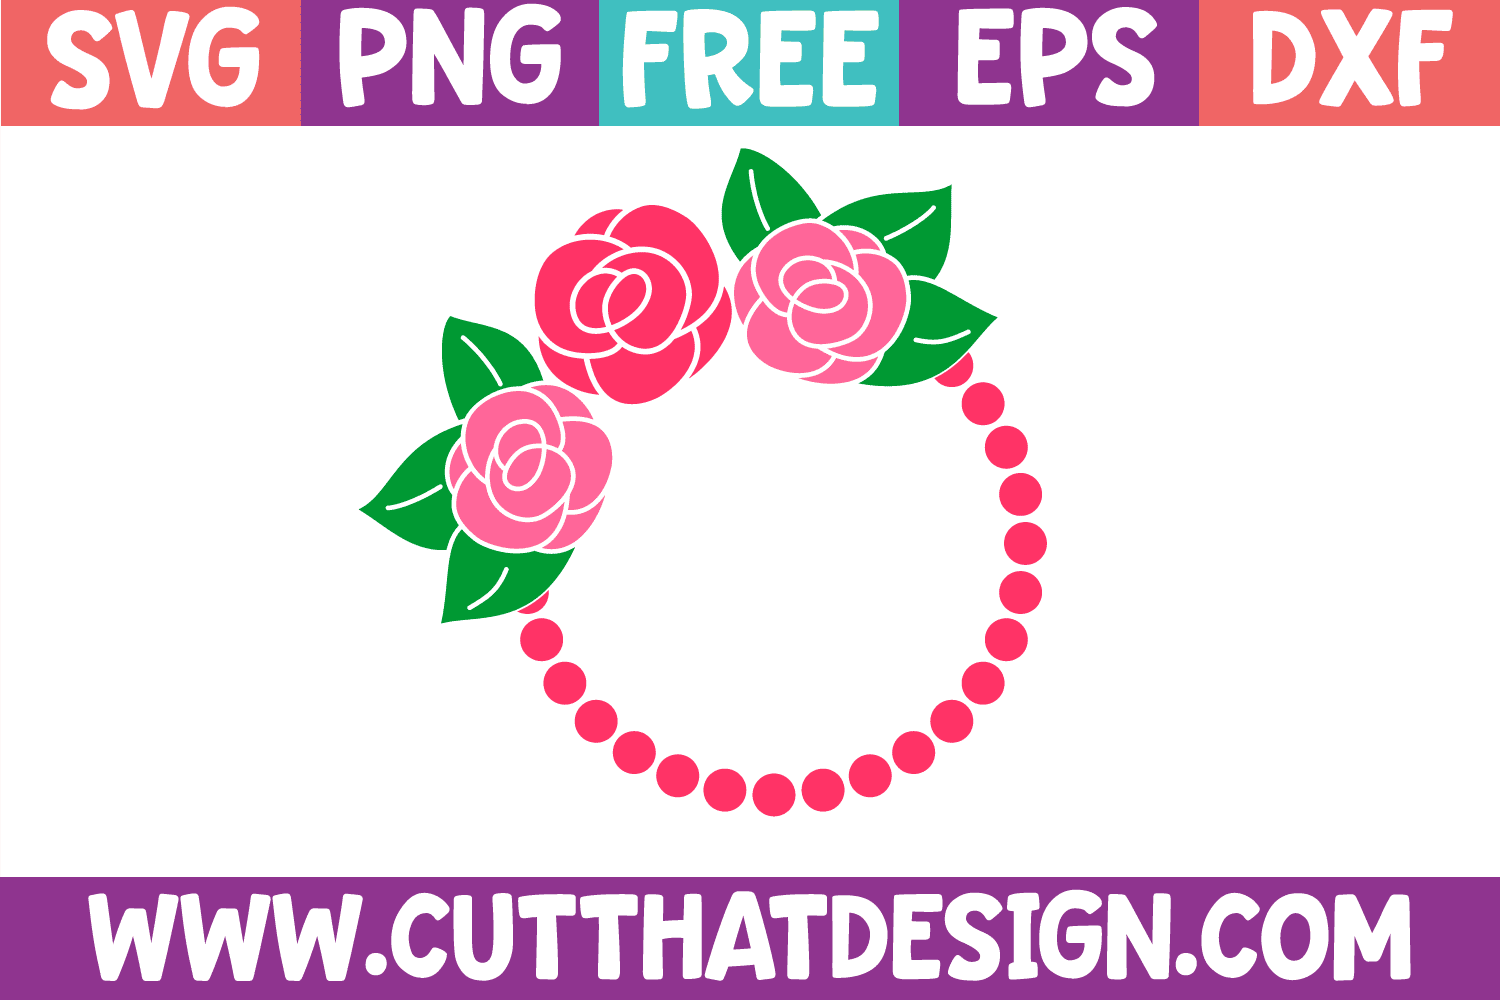 Over 2500+ Free SVG Files for Cricut and Silhouette cut machines.